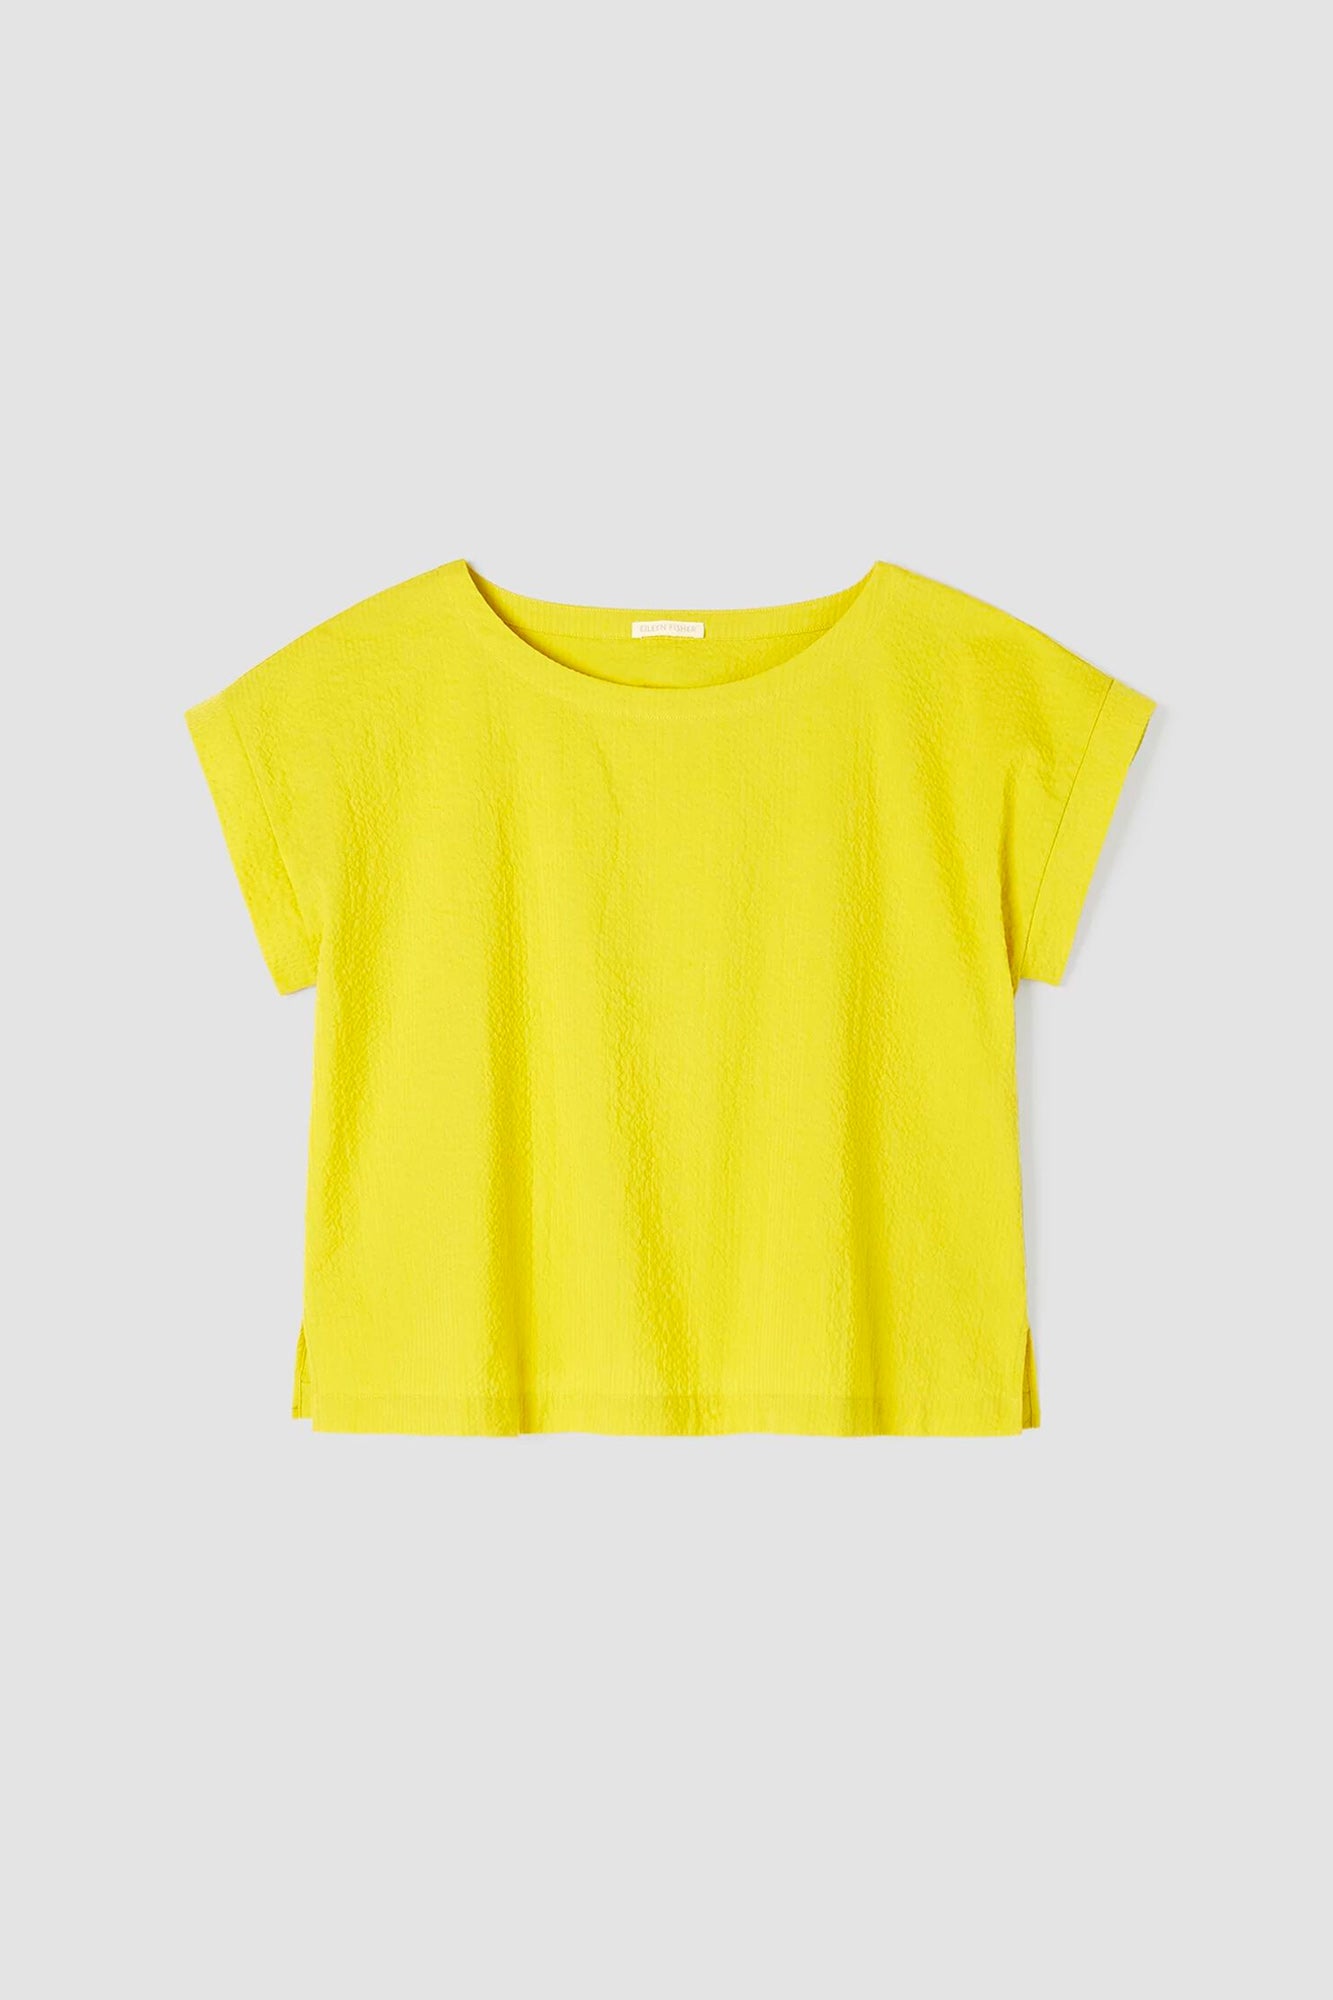 This Ballet Neck Square Top from Eileen Fisher blends a timeless style with modern texture for an effortless look.